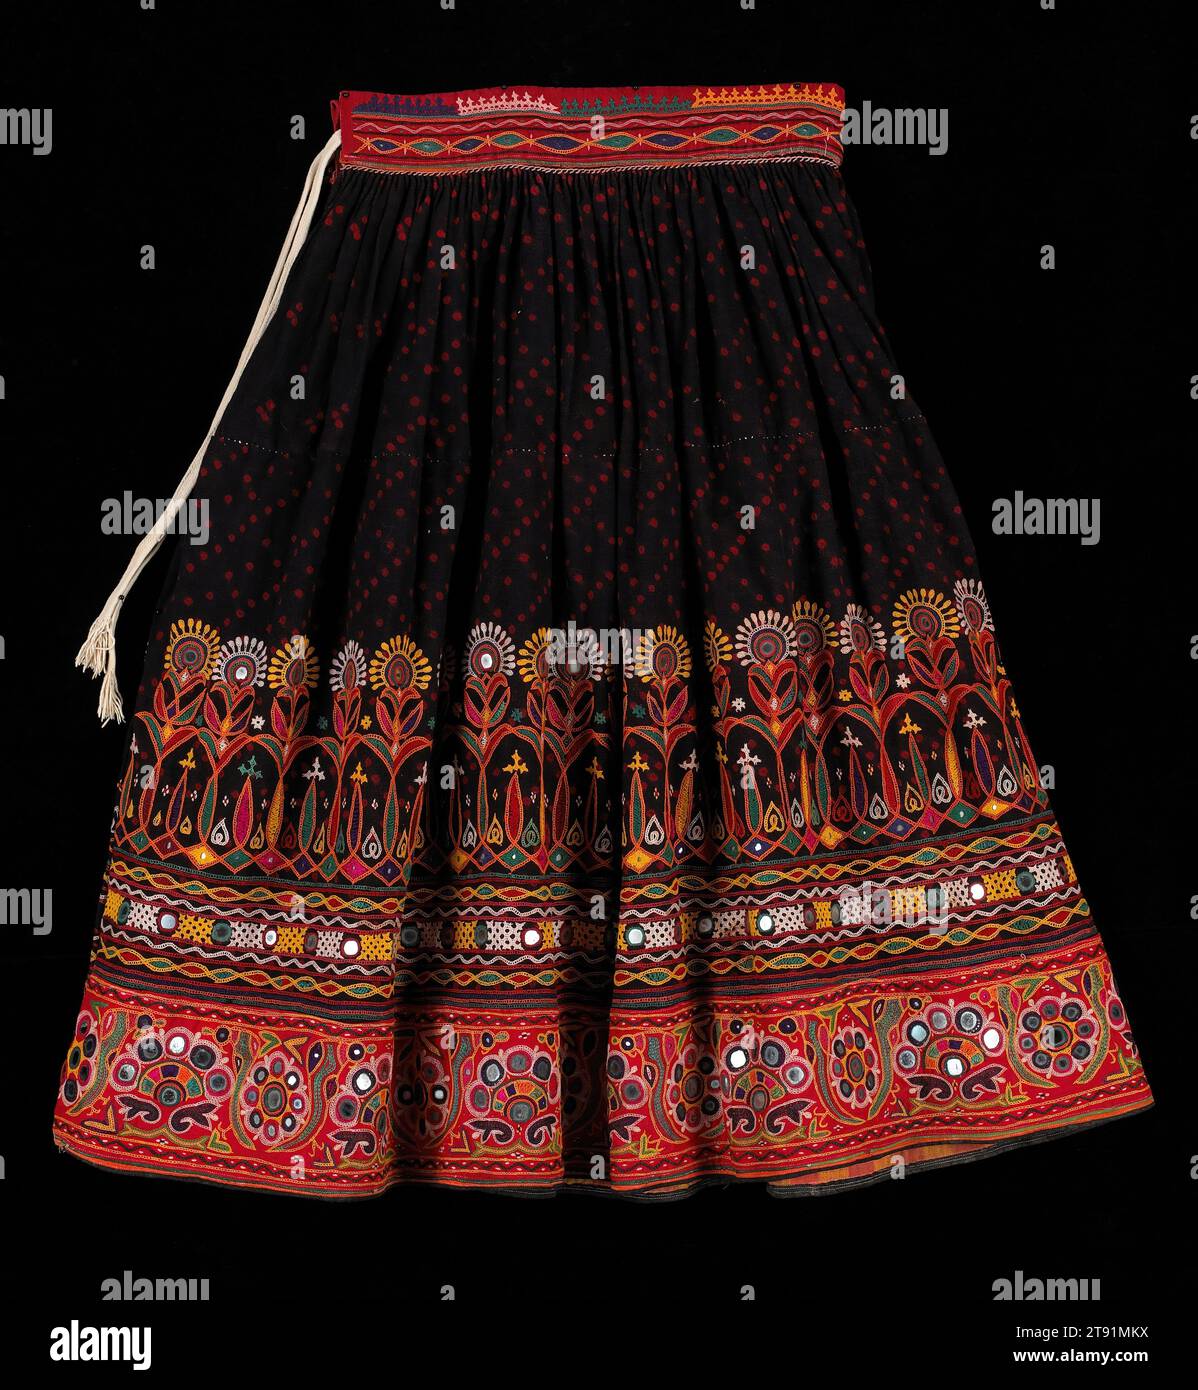 Skirt, c. 1970-1980, 34 x 50 in. (86.36 x 127 cm), Cotton; embroidery, India, 20th century Stock Photo